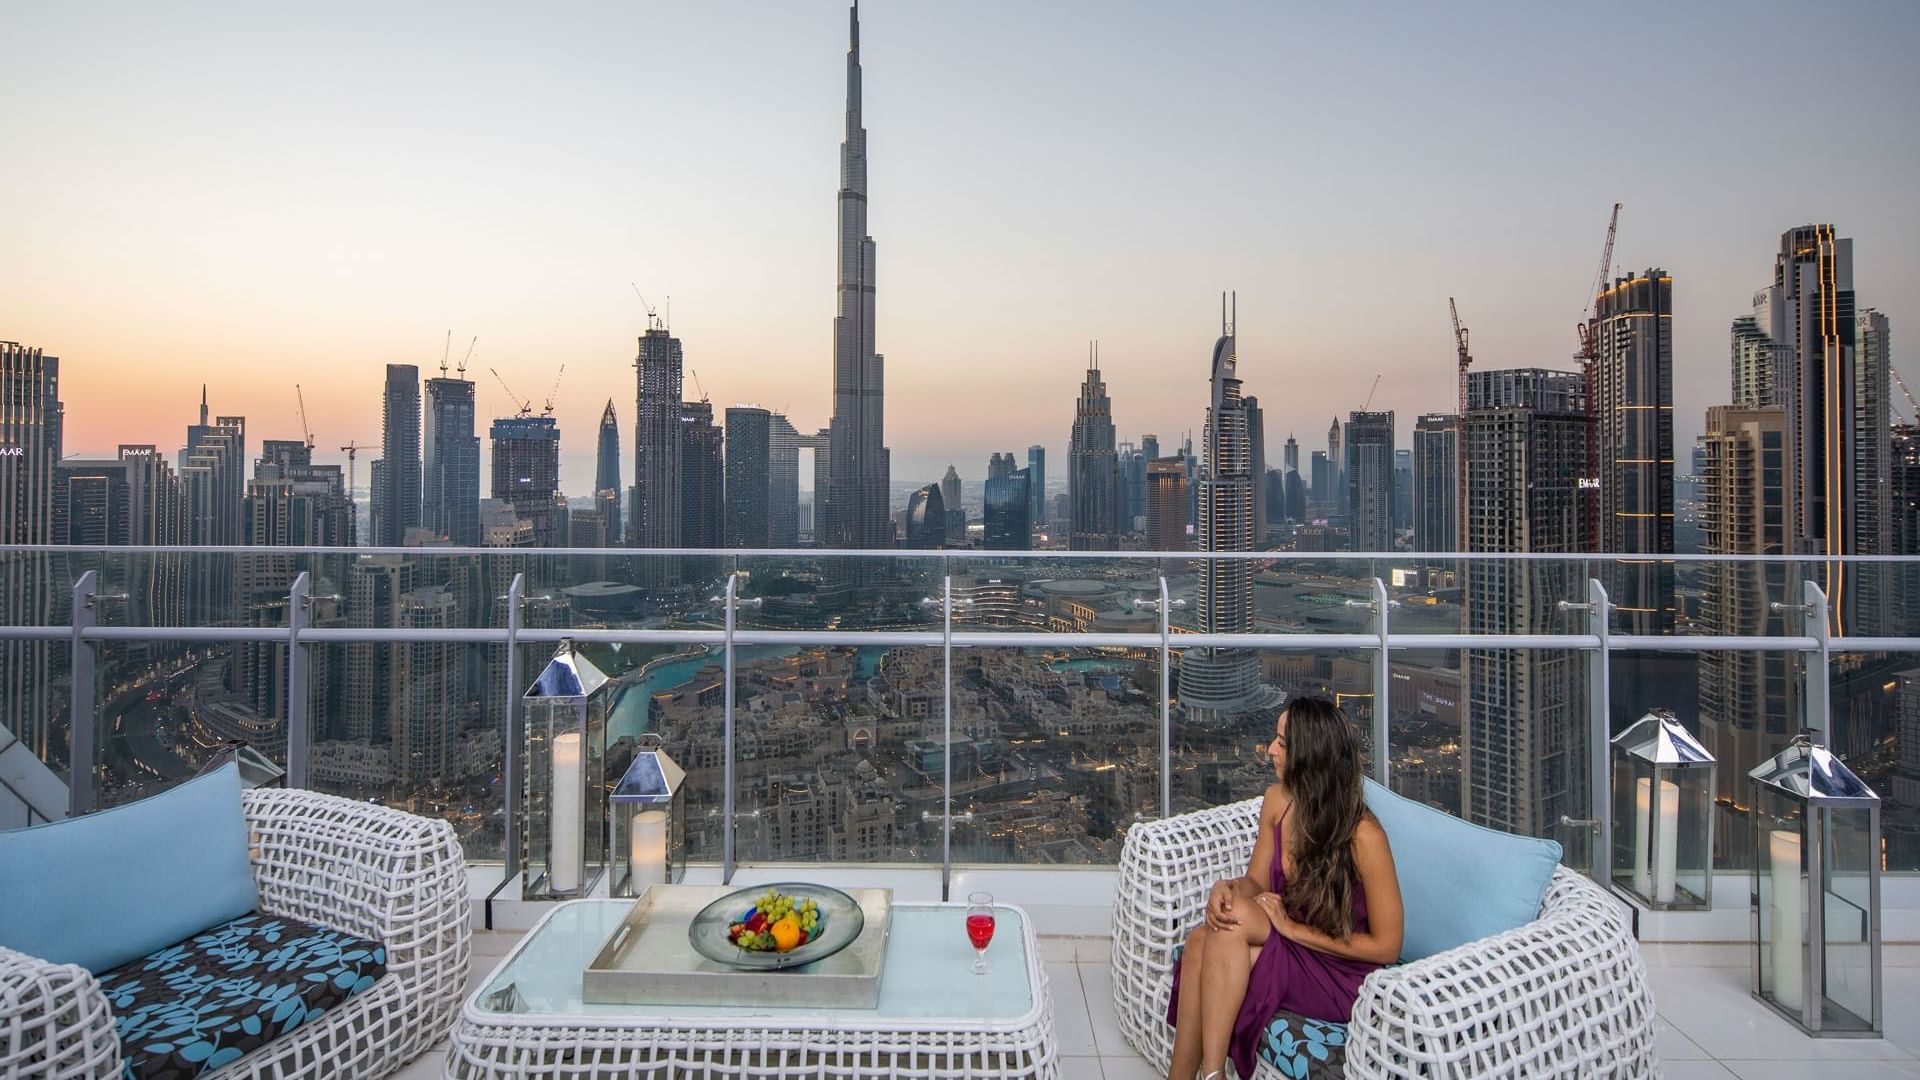 A lady on a wicker chair overlooking the Burj Khalifa from the balcony at DAMAC Maison Distinction